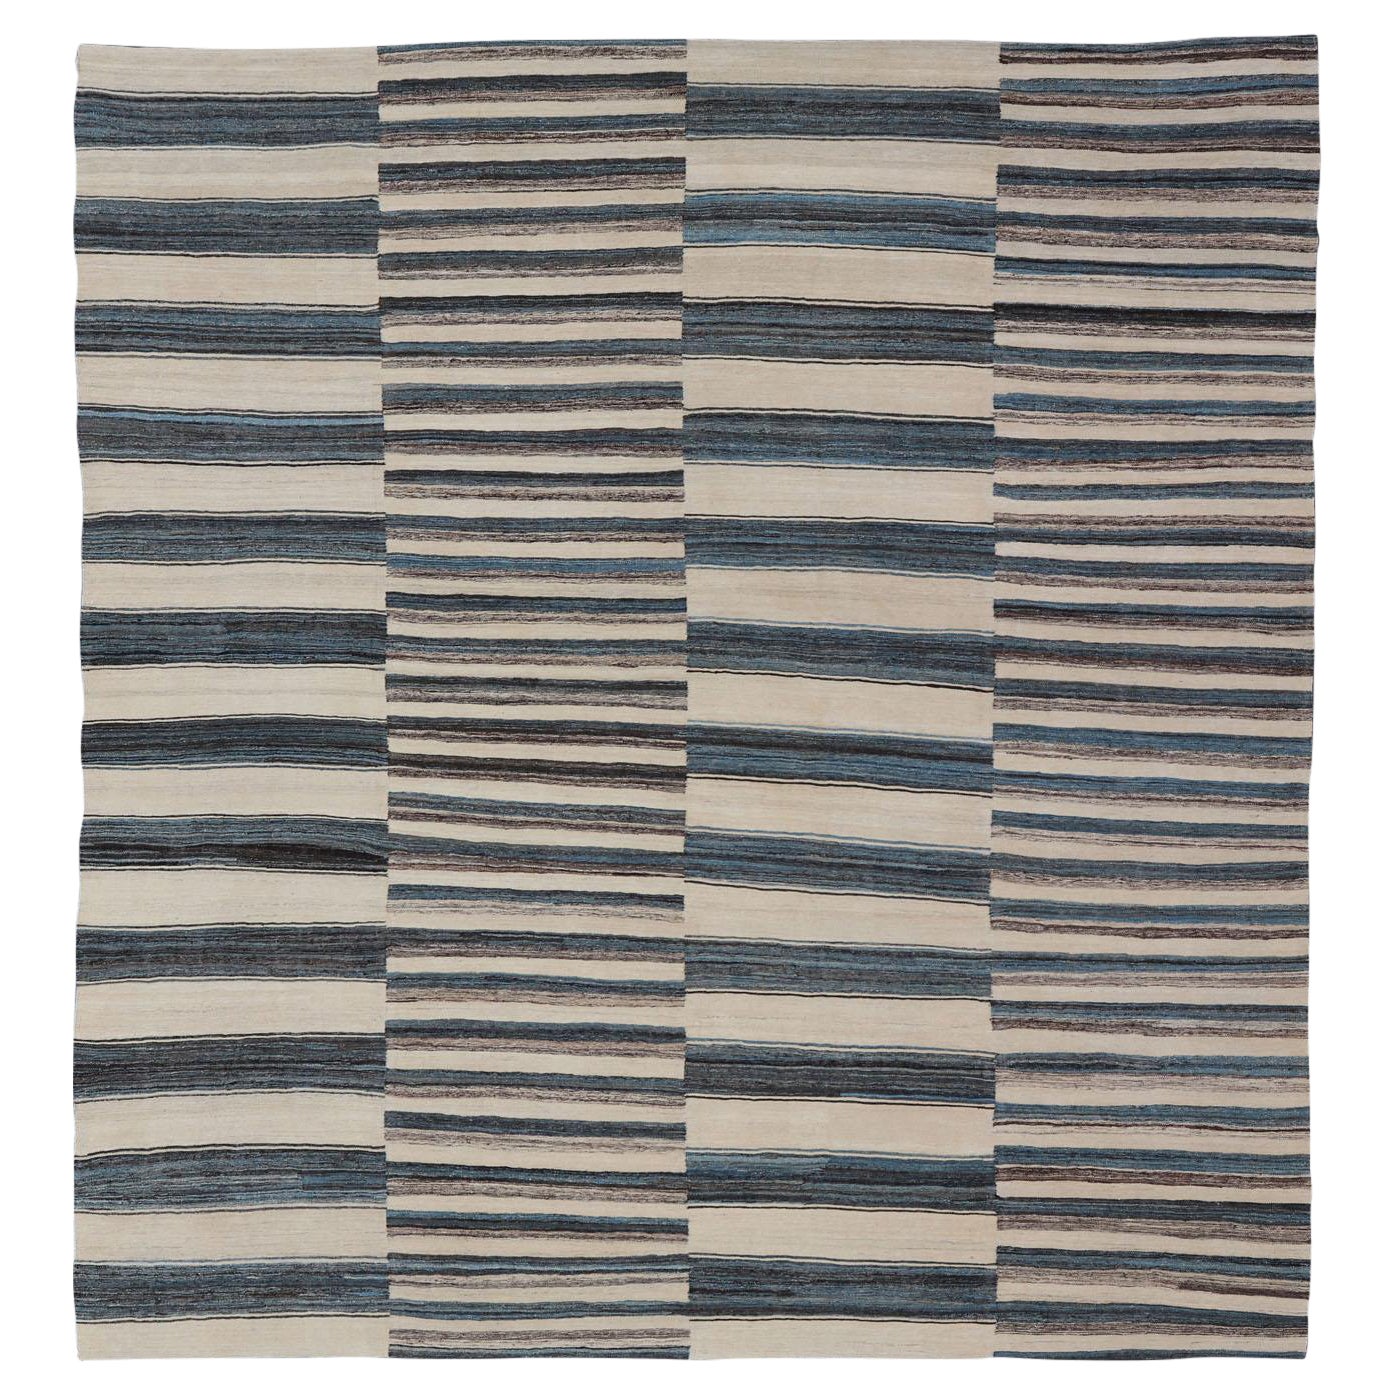 Sqaure Flat-Weave Kilim Rug with Classic Stripe Design in Blue, Cream, Brown For Sale